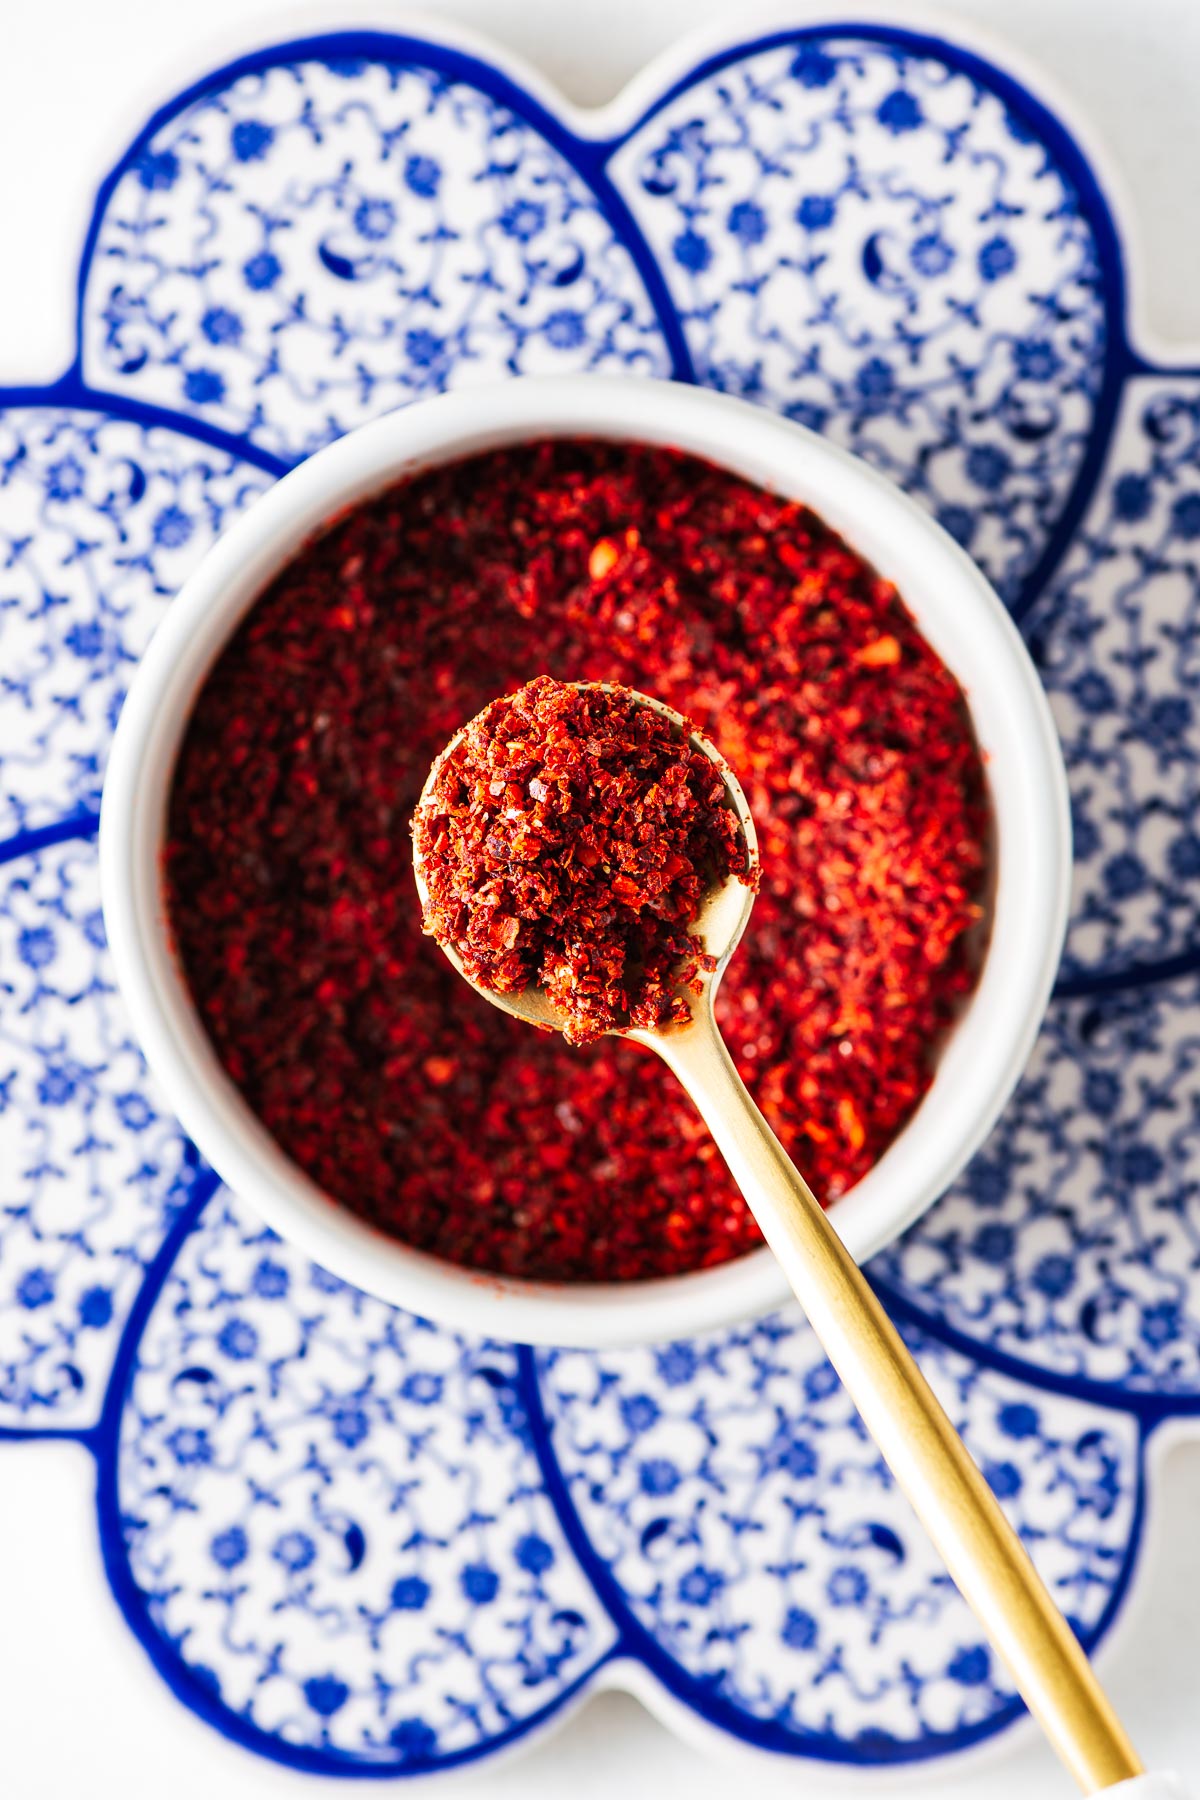 Homemade Aleppo-style pepper substitute in a small white bowl with a golden teaspoon.